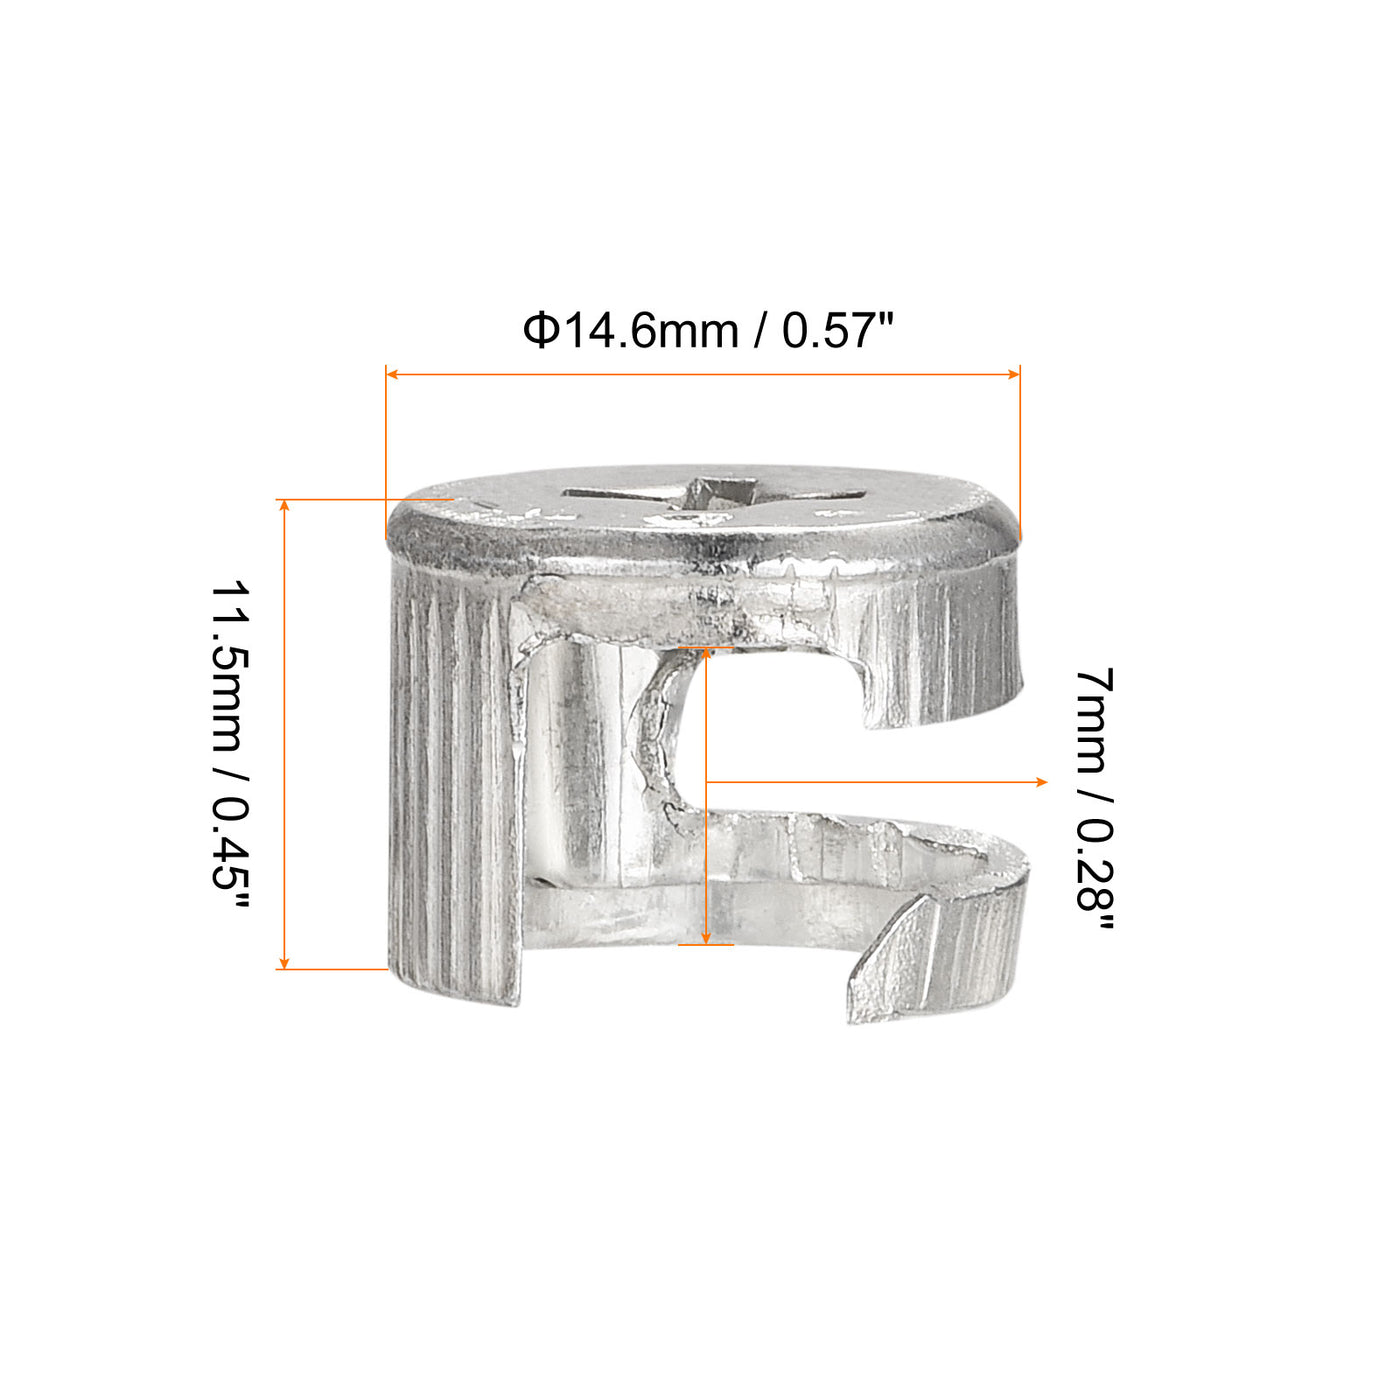 Uxcell Uxcell Cam Lock Nut for Furniture, 12pcs 14.6x11.5mm Joint Connector Locking Nuts